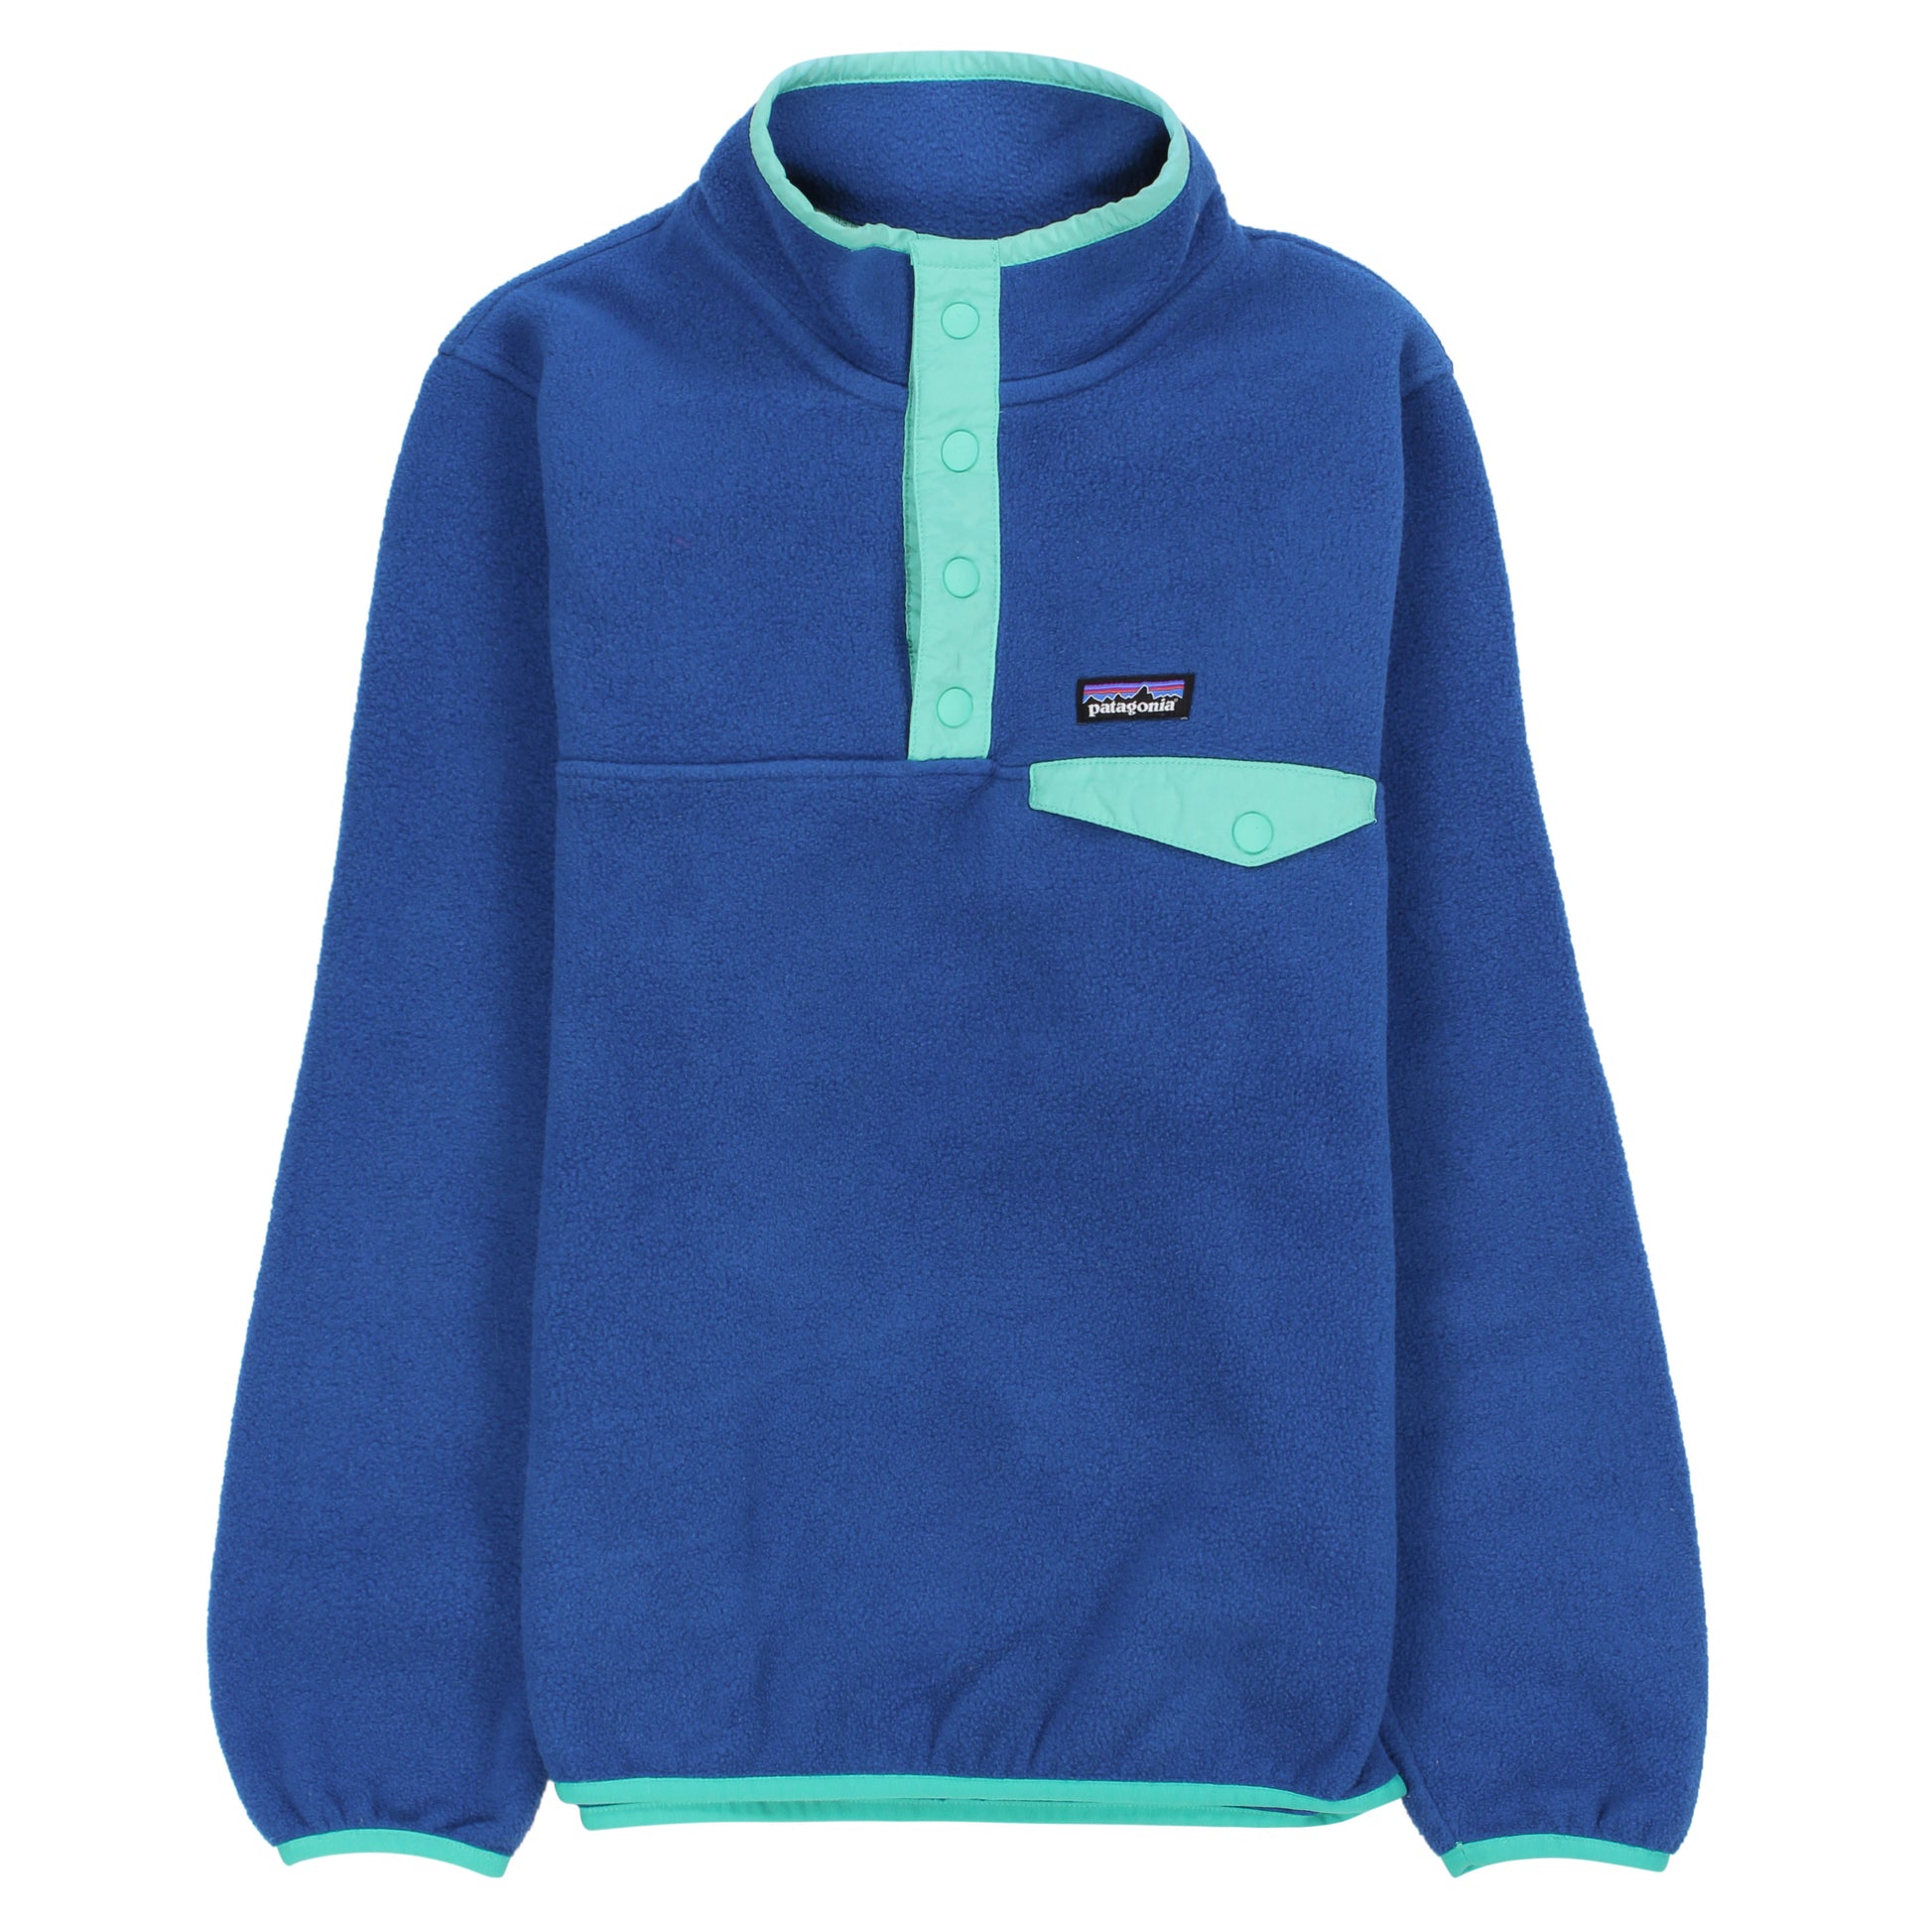 Patagonia Lightweight Synchilla Snap-T Pullover - Girl's